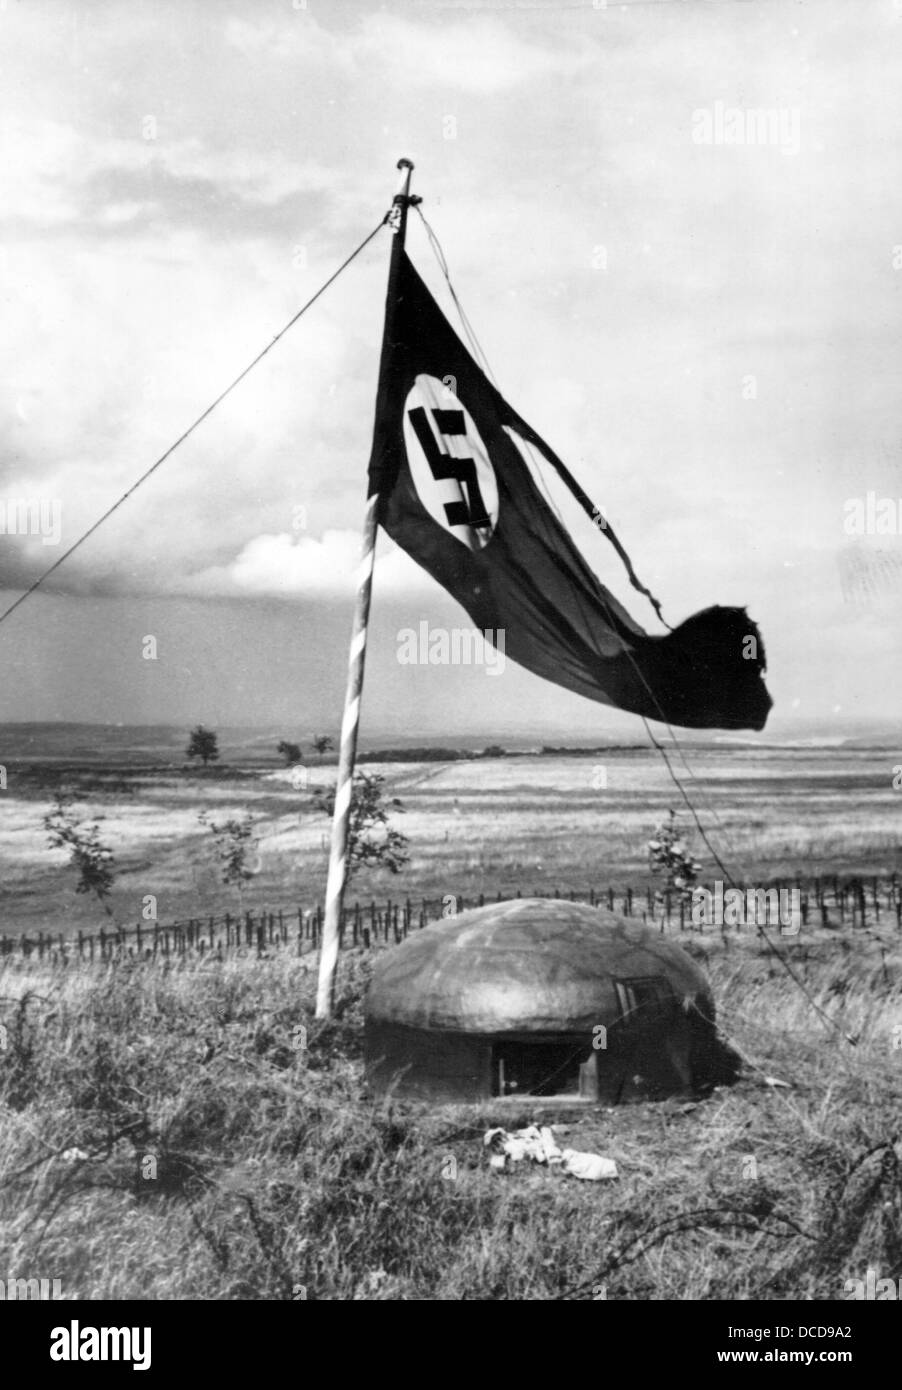 Members of the German Wehrmacht hoisted the flag of the Third Reich with swastica on a bunker of the Maginot Line after it has been occupied in July 1940. Fotoarchiv für Zeitgeschichte Stock Photo